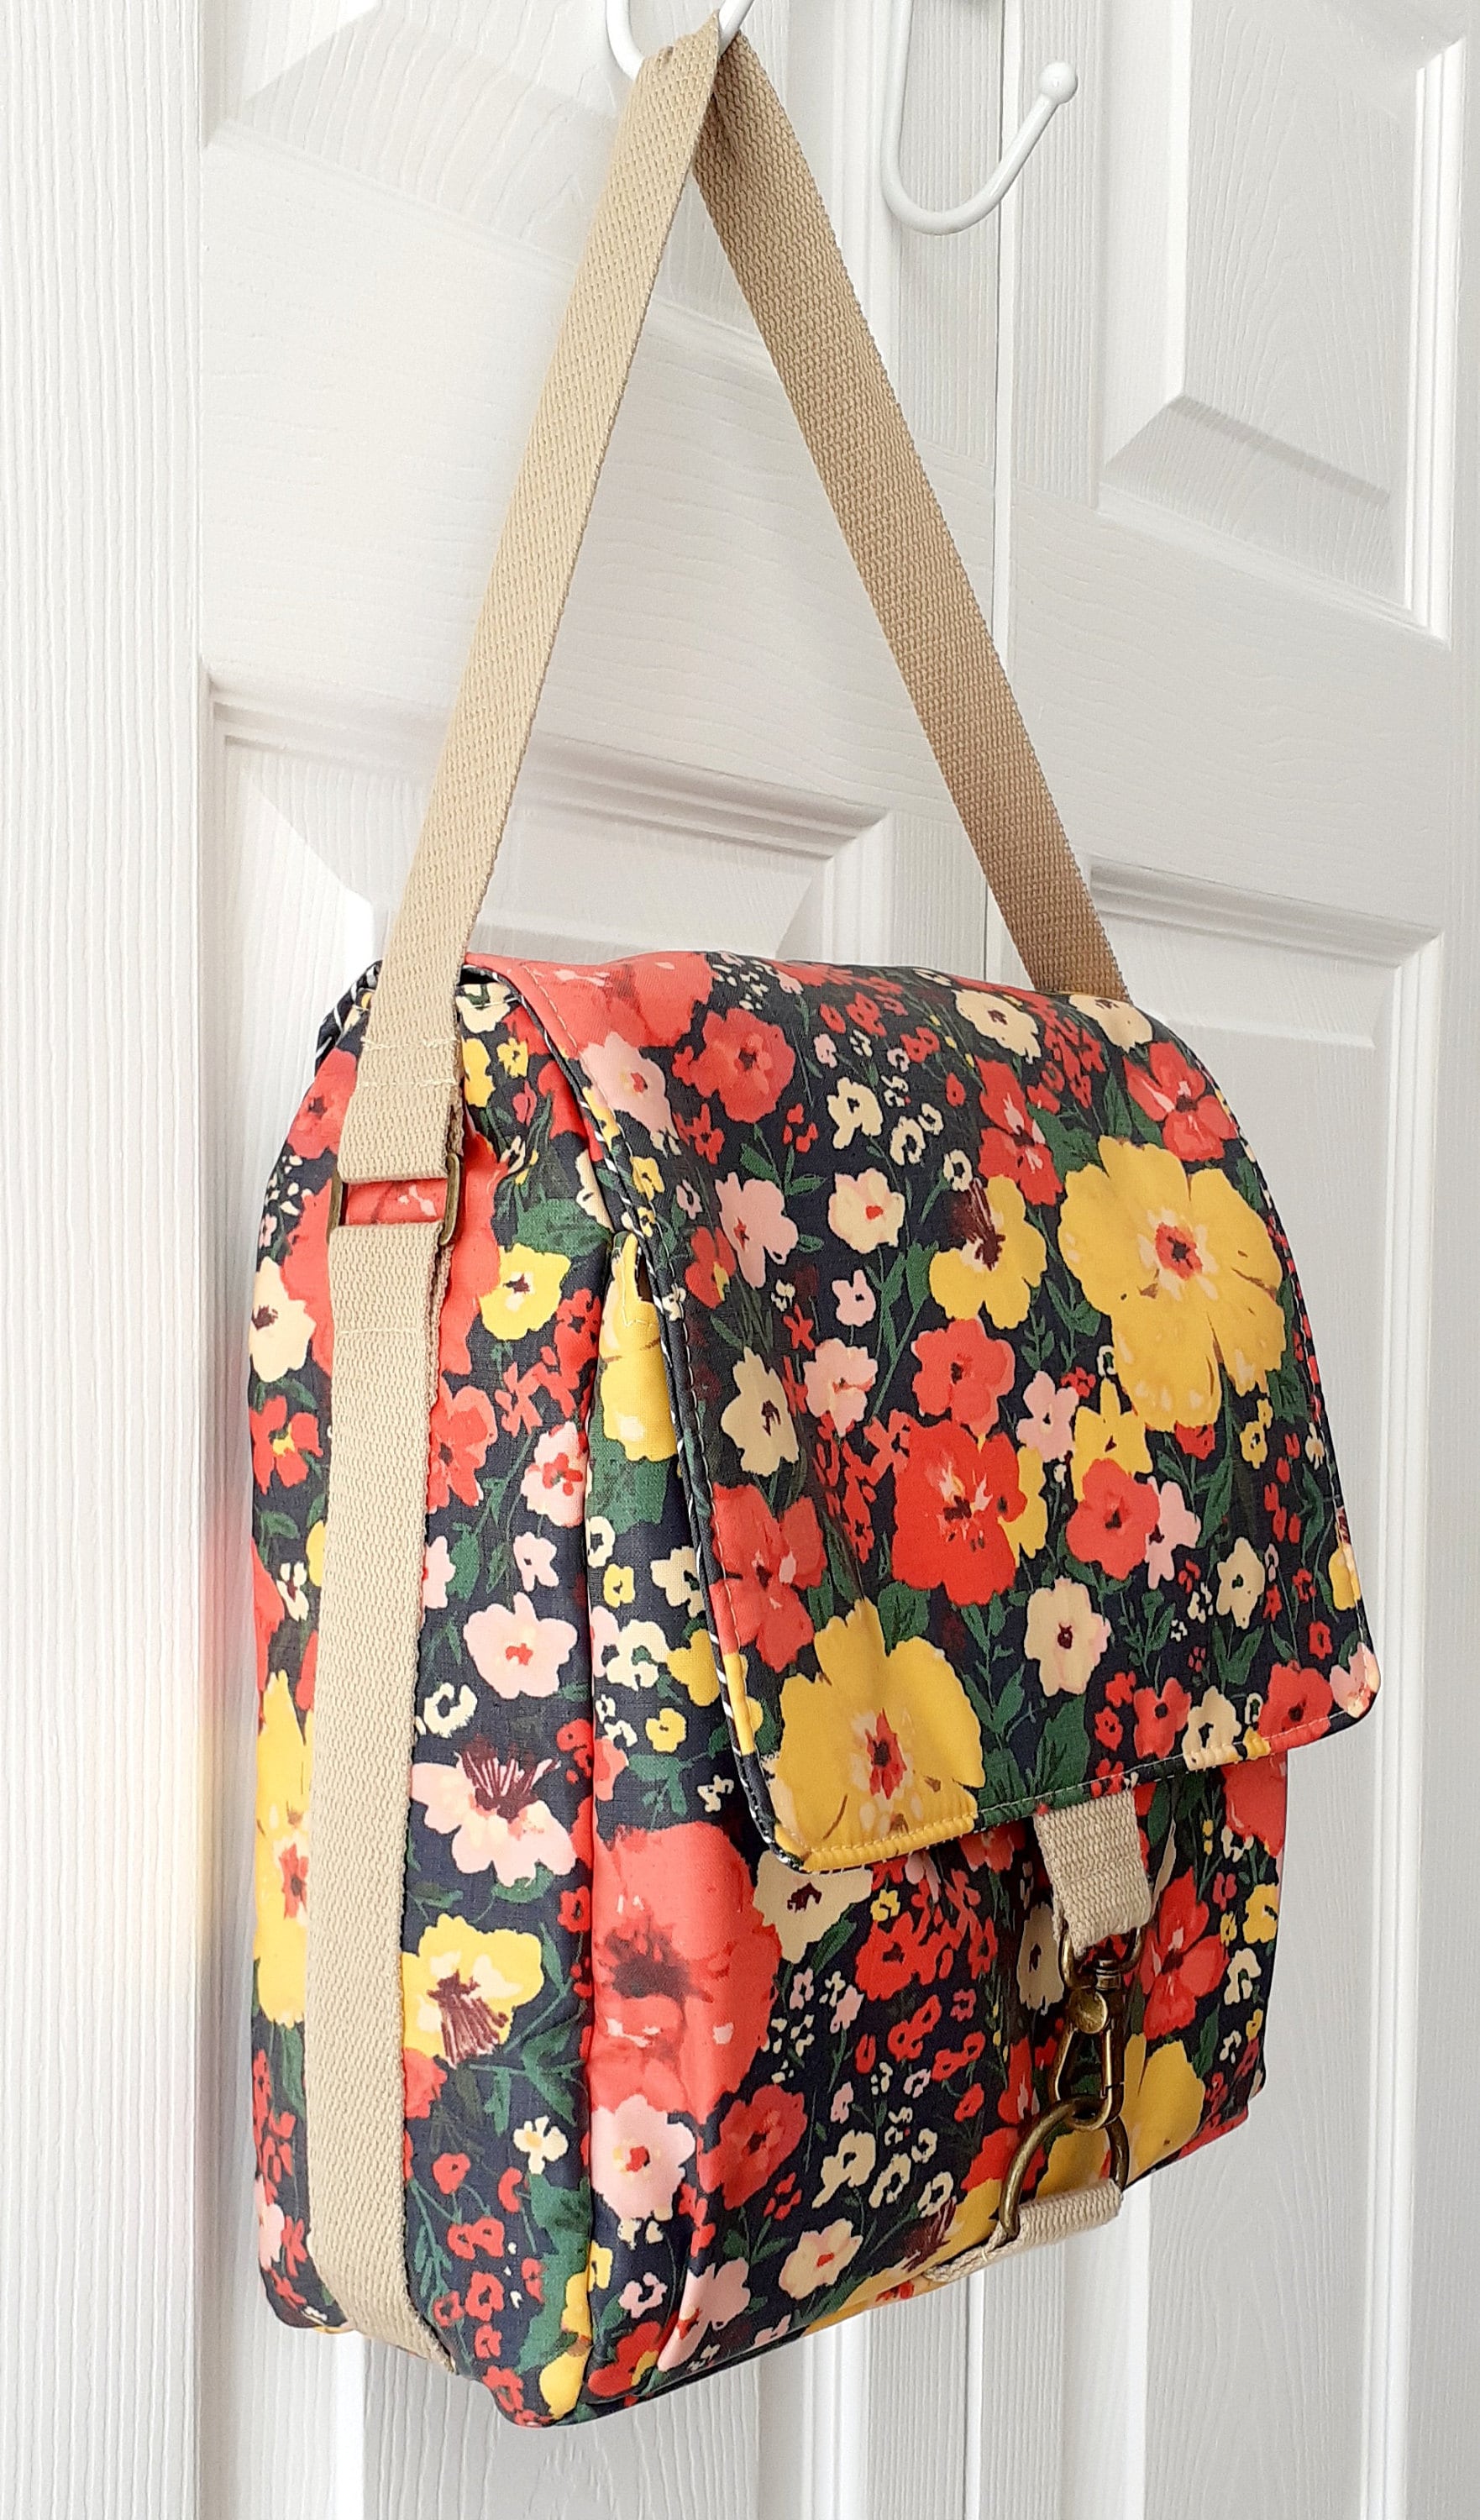 Nine to five lunch bag pdf sewing pattern from Sew Sofia Bag Patterns